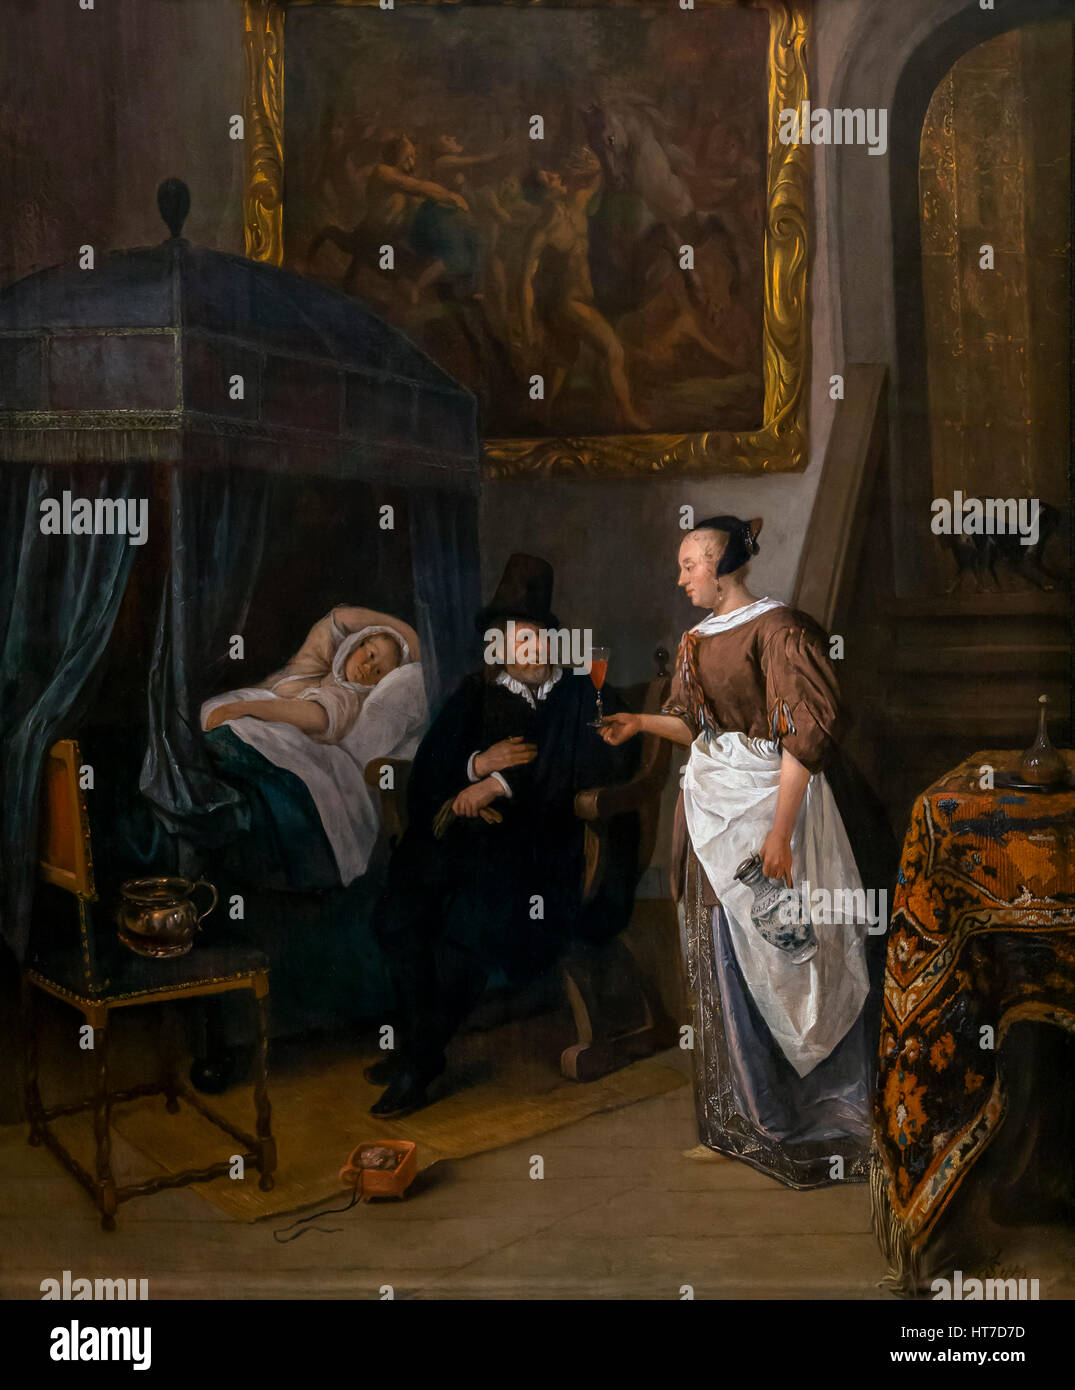 The Doctor's Visit, by Jan Steen, circa 1660-2, Royal Art Gallery, Mauritshuis Museum, The Hague, Netherlands, Europe Stock Photo